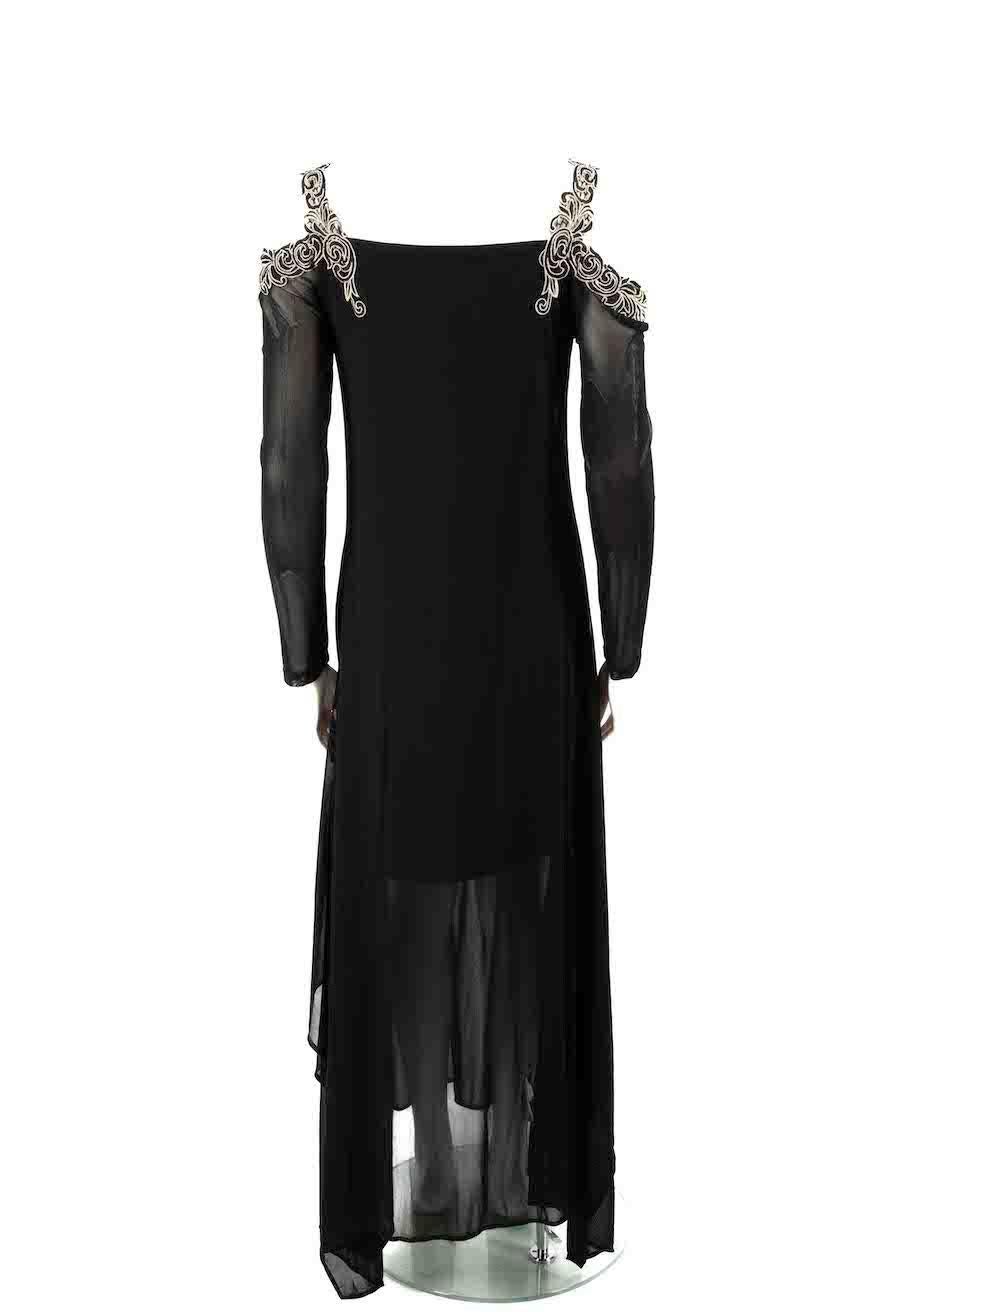 Anne Fontaine Black Lace Trim Detail Maxi Dress Size XL In New Condition For Sale In London, GB